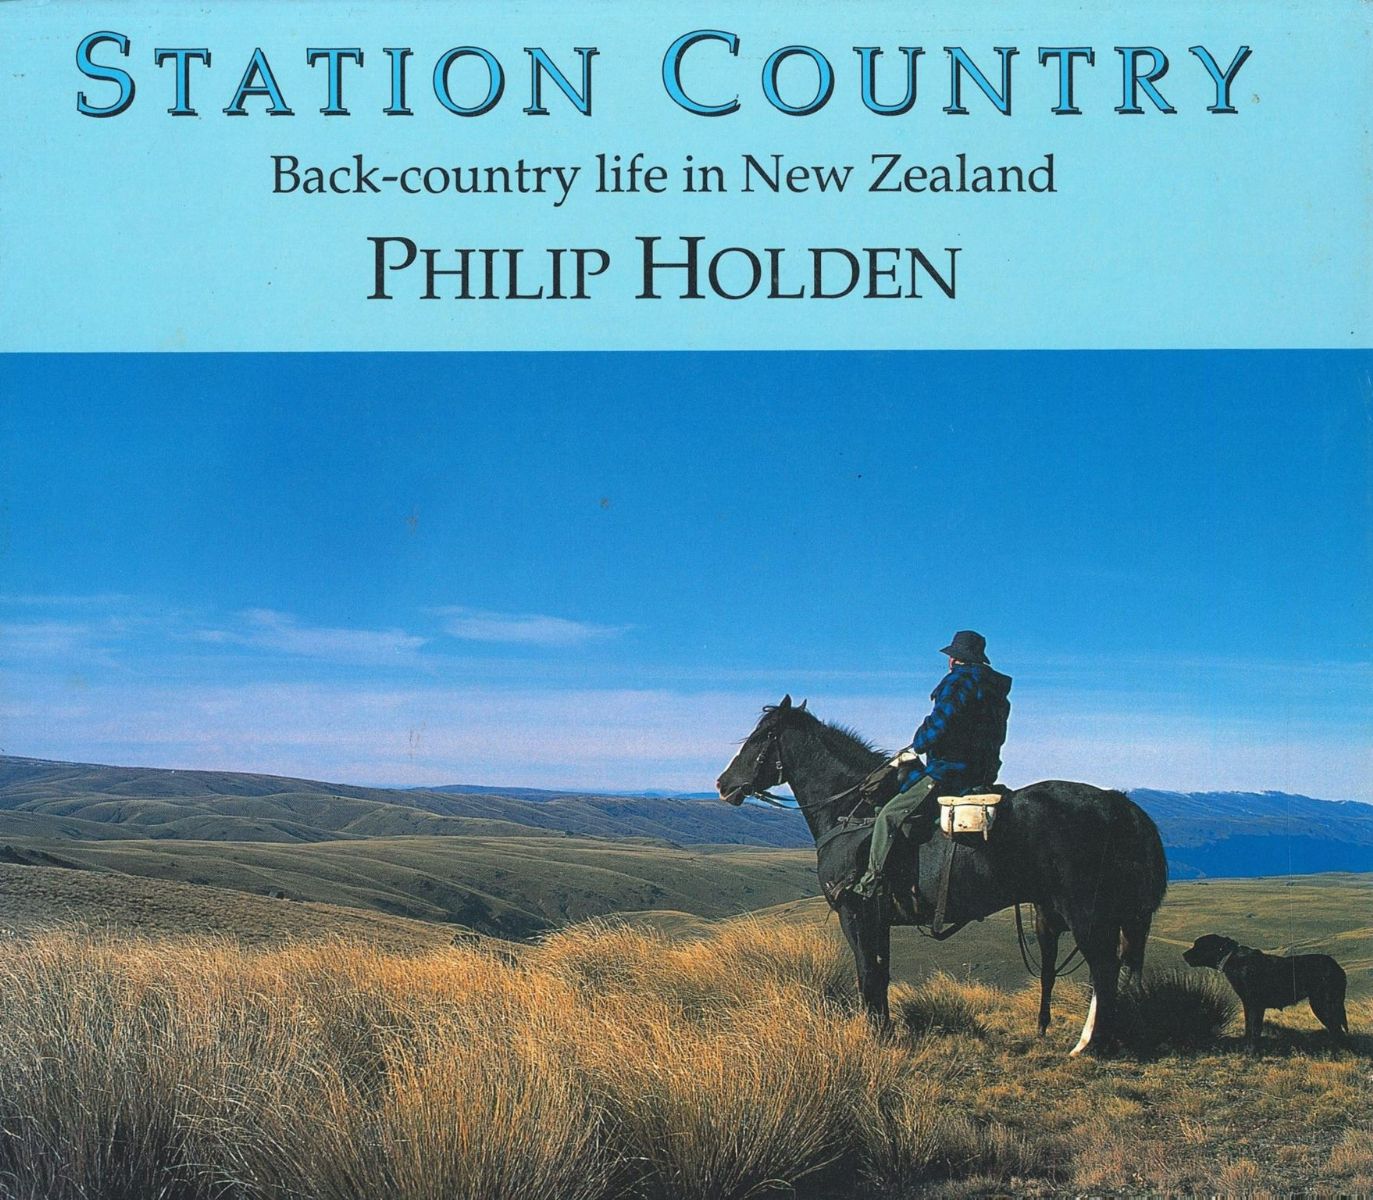 STATION COUNTRY: Back-country life in New Zealand